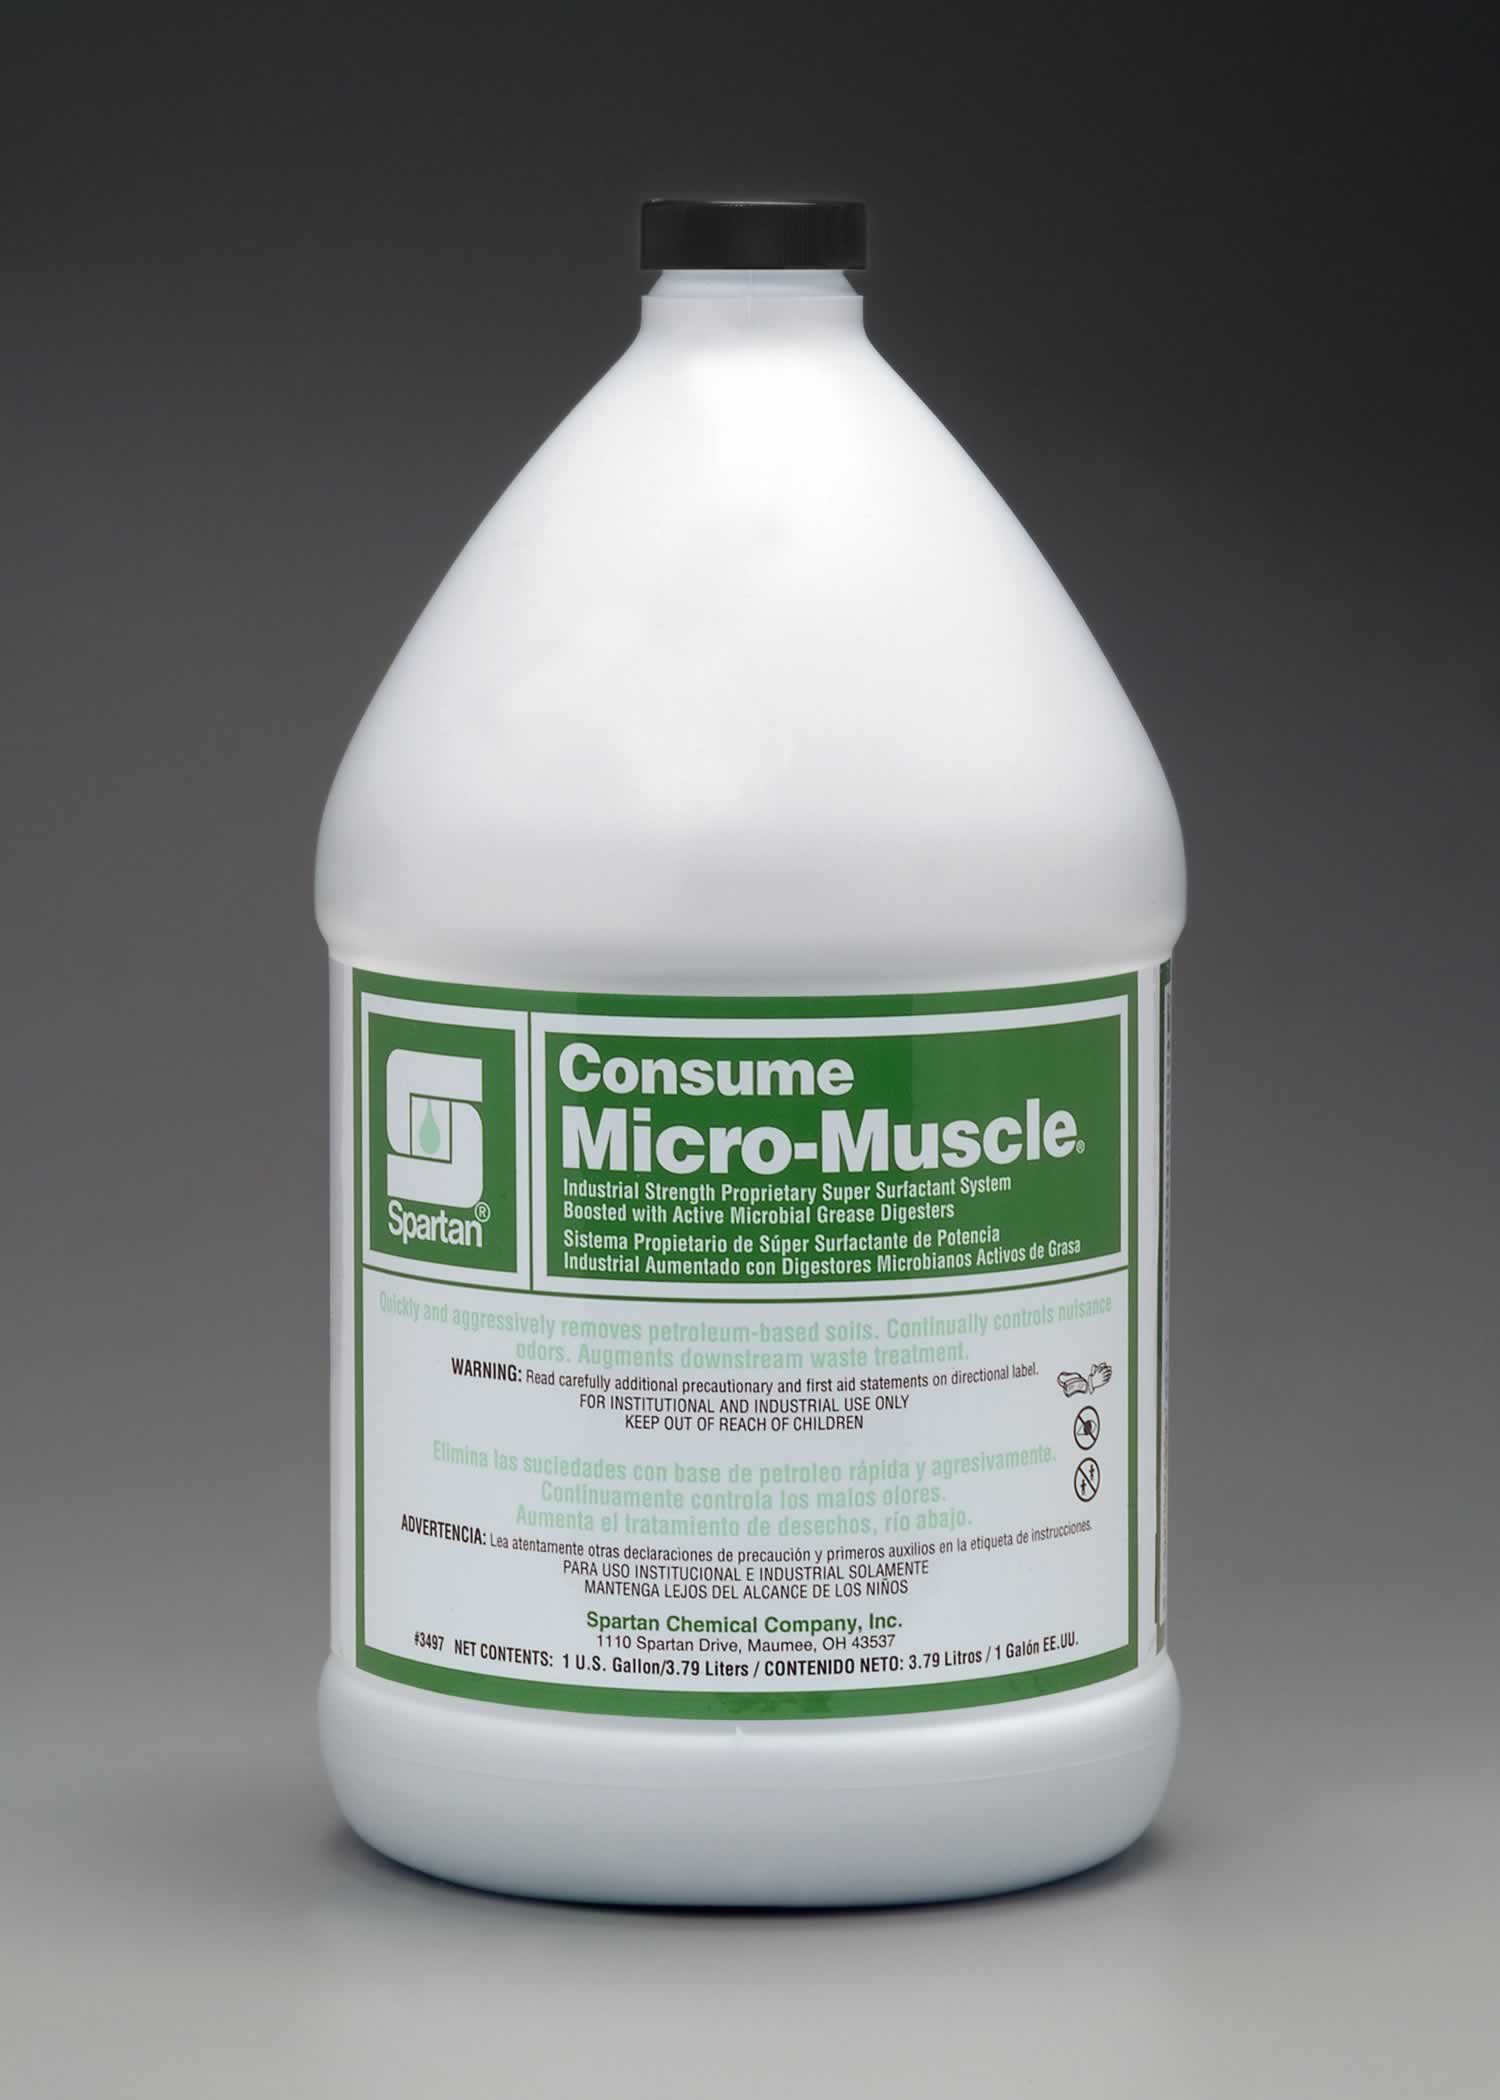 Consume Micro-Muscle industrial strength degreaser and odor controller